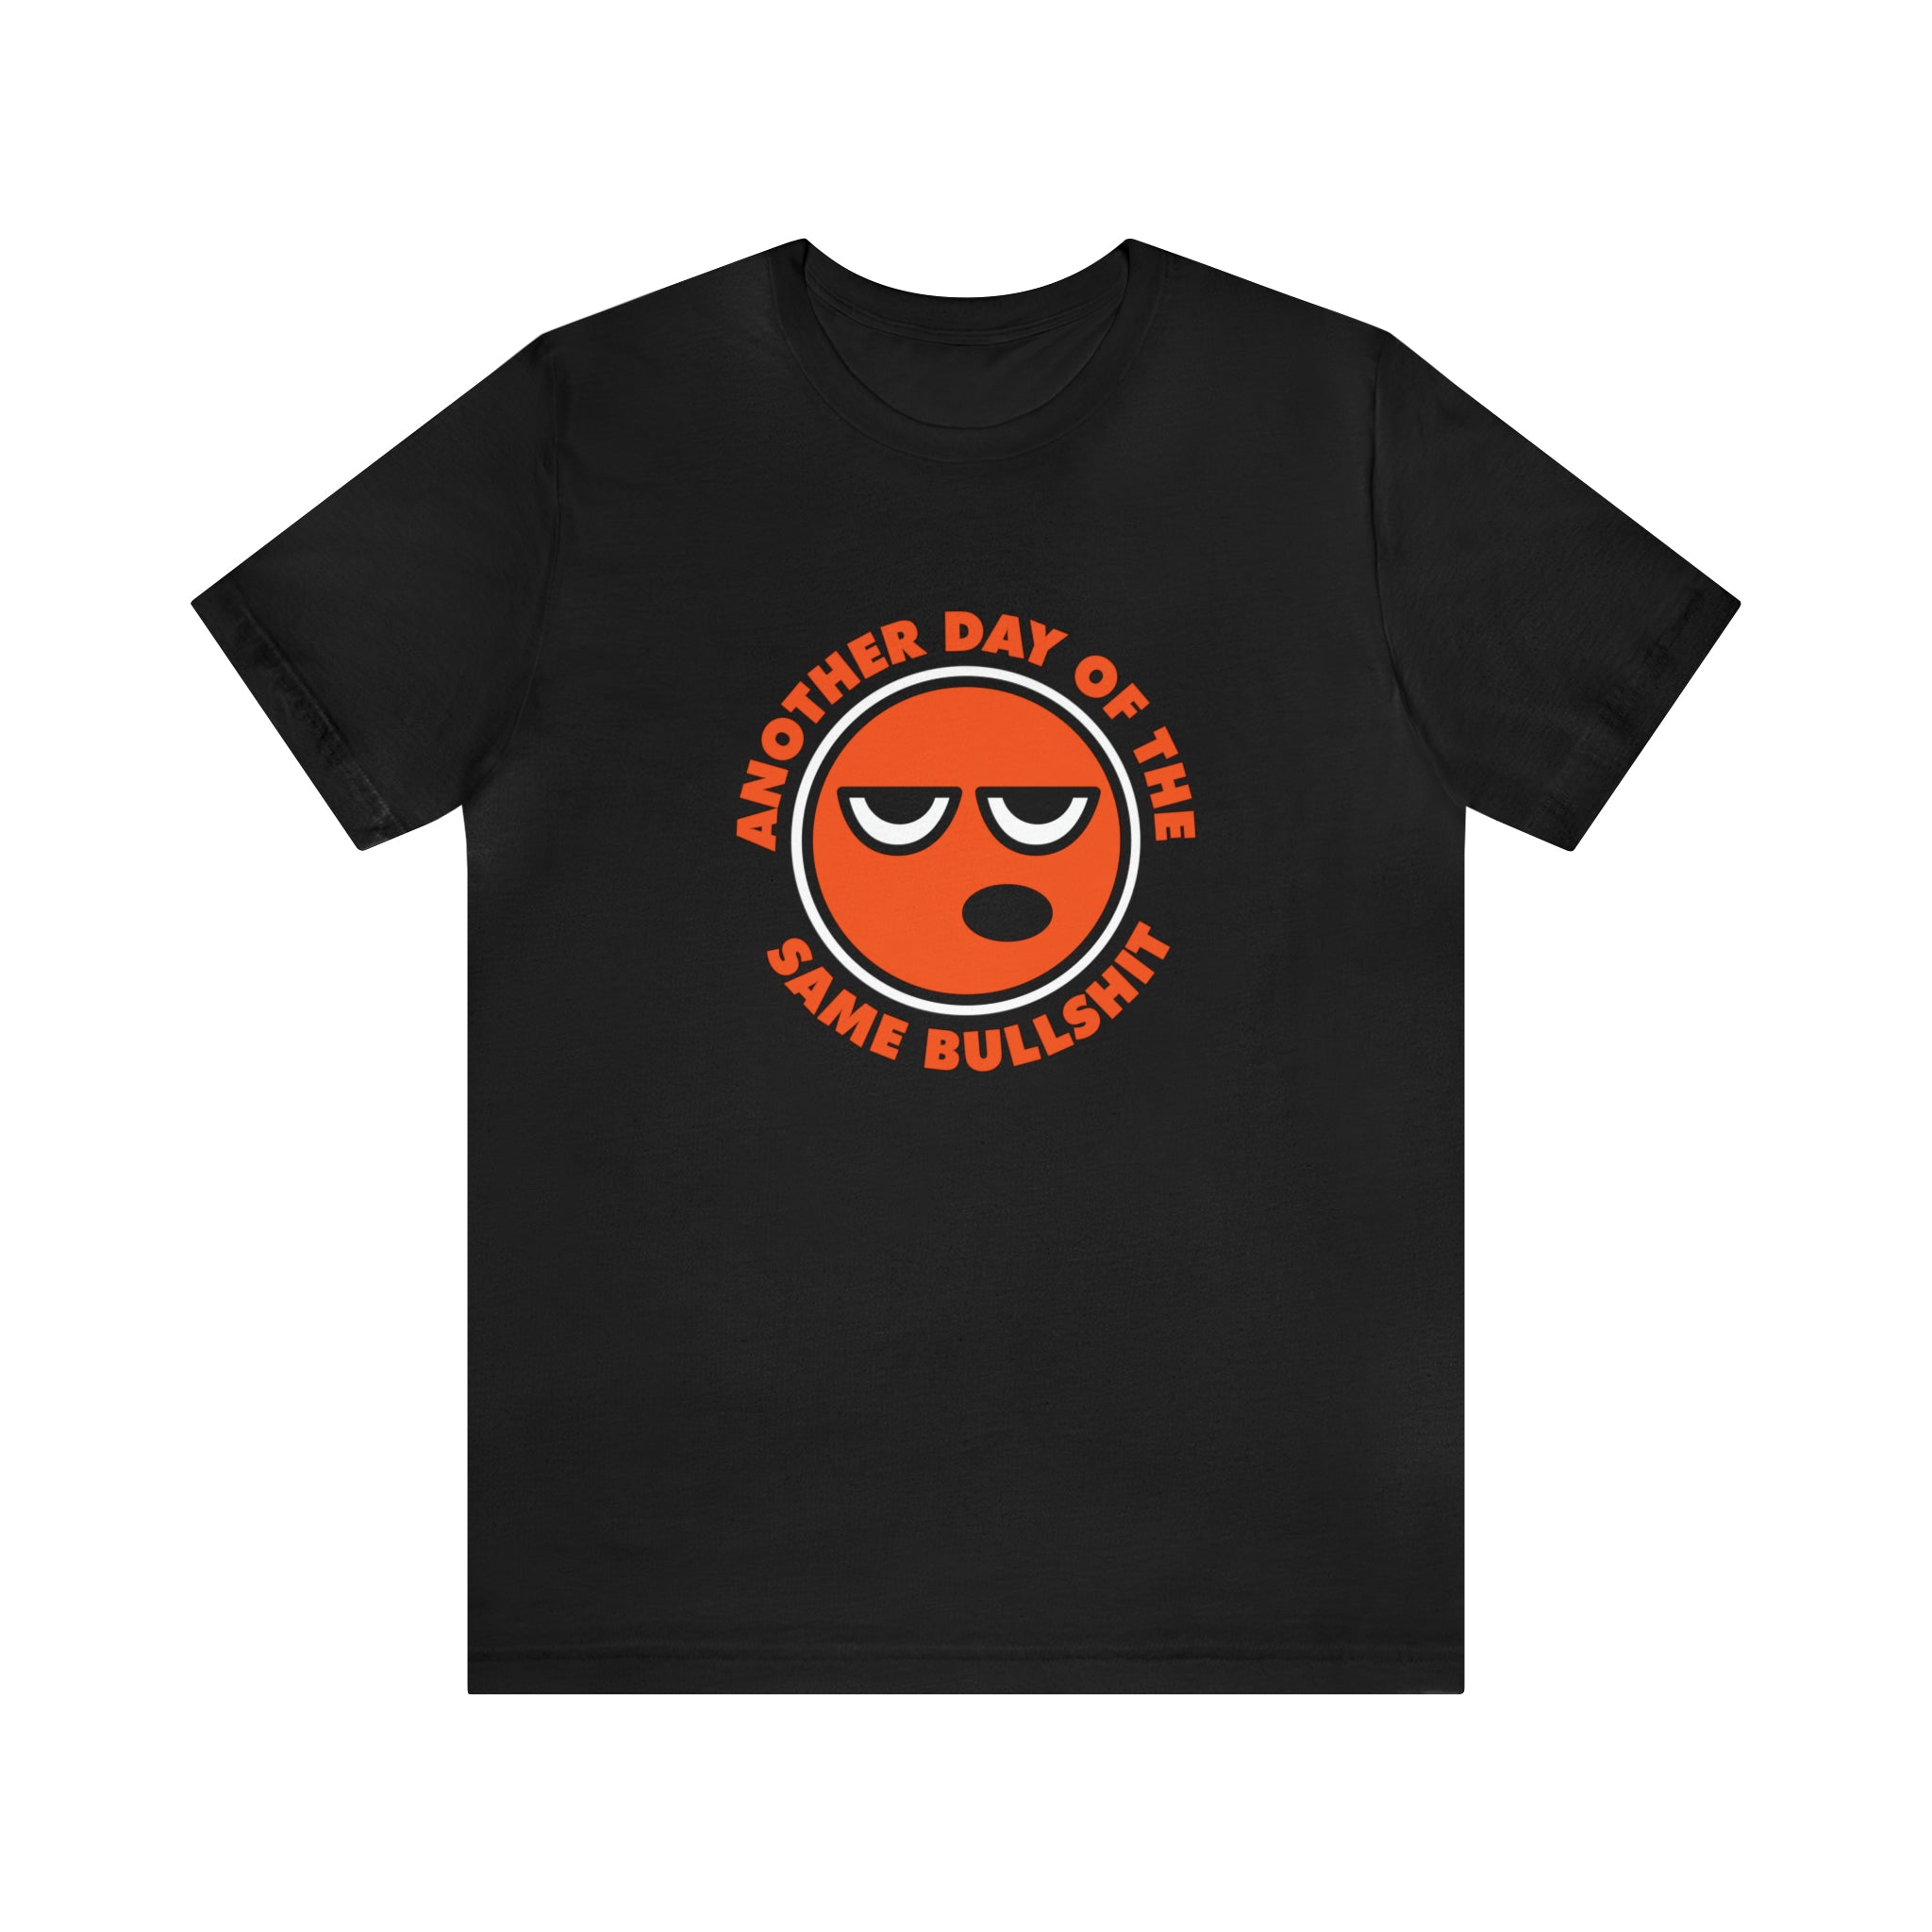 A Another Day of the Same Bullshit t-shirt with an orange smiley face, symbolizing a positive attitude.